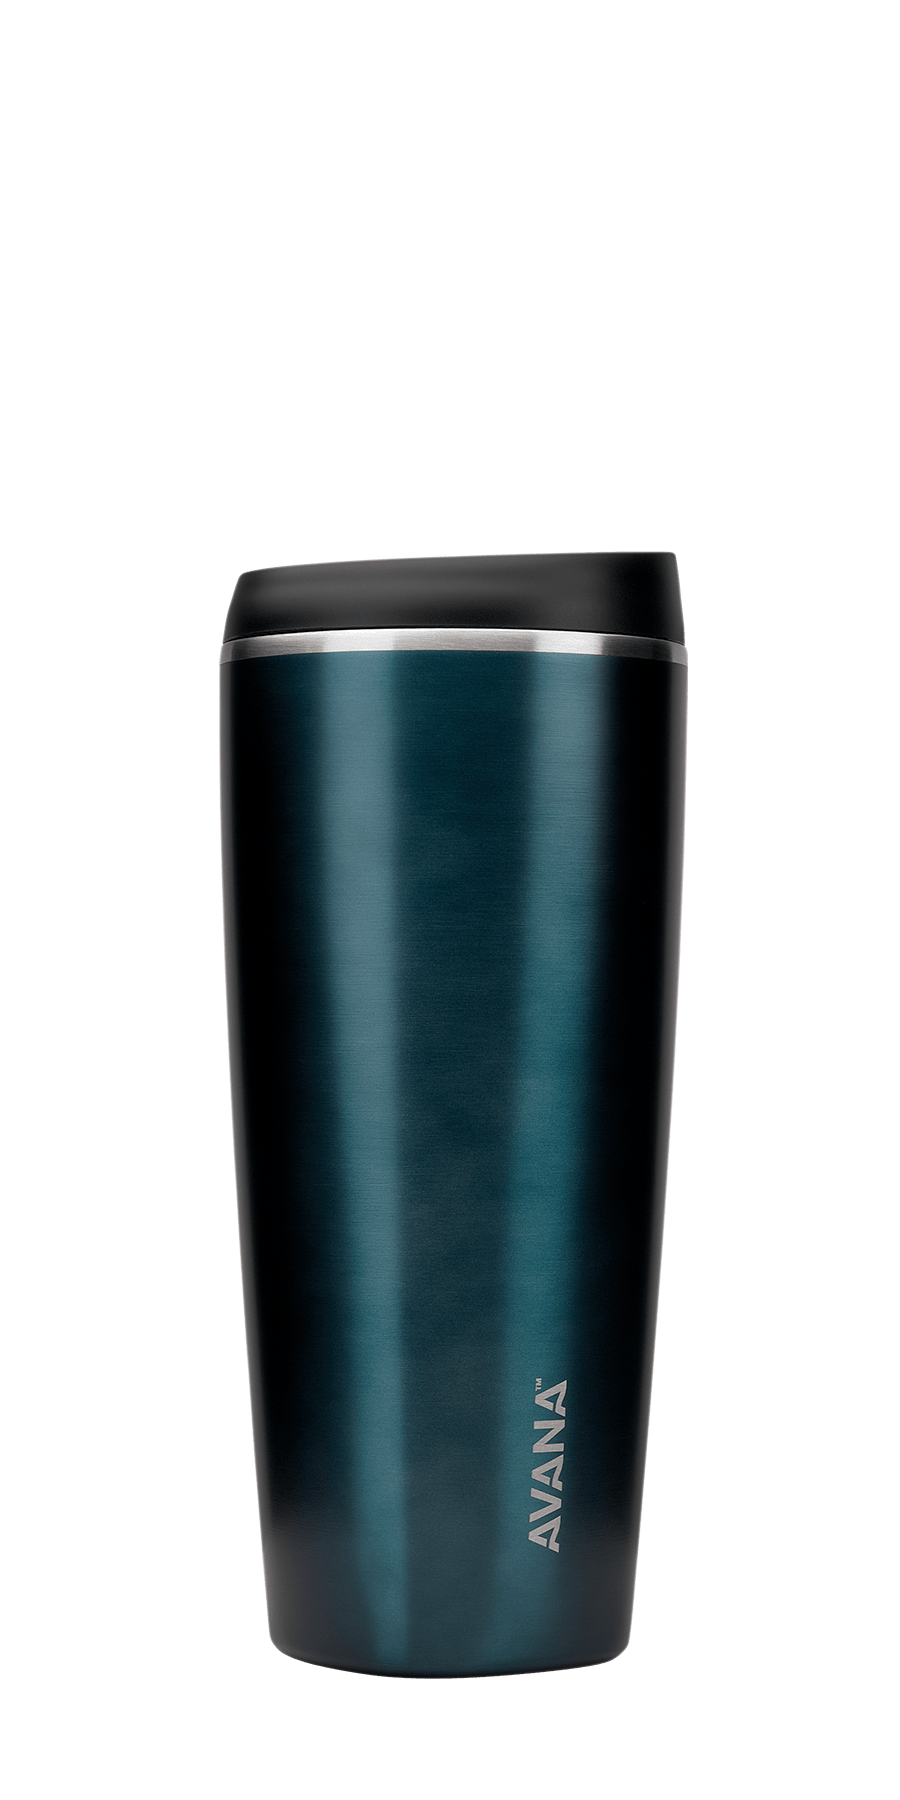 30 oz Insulated Stainless Steel Tumbler with Sure Grip Design